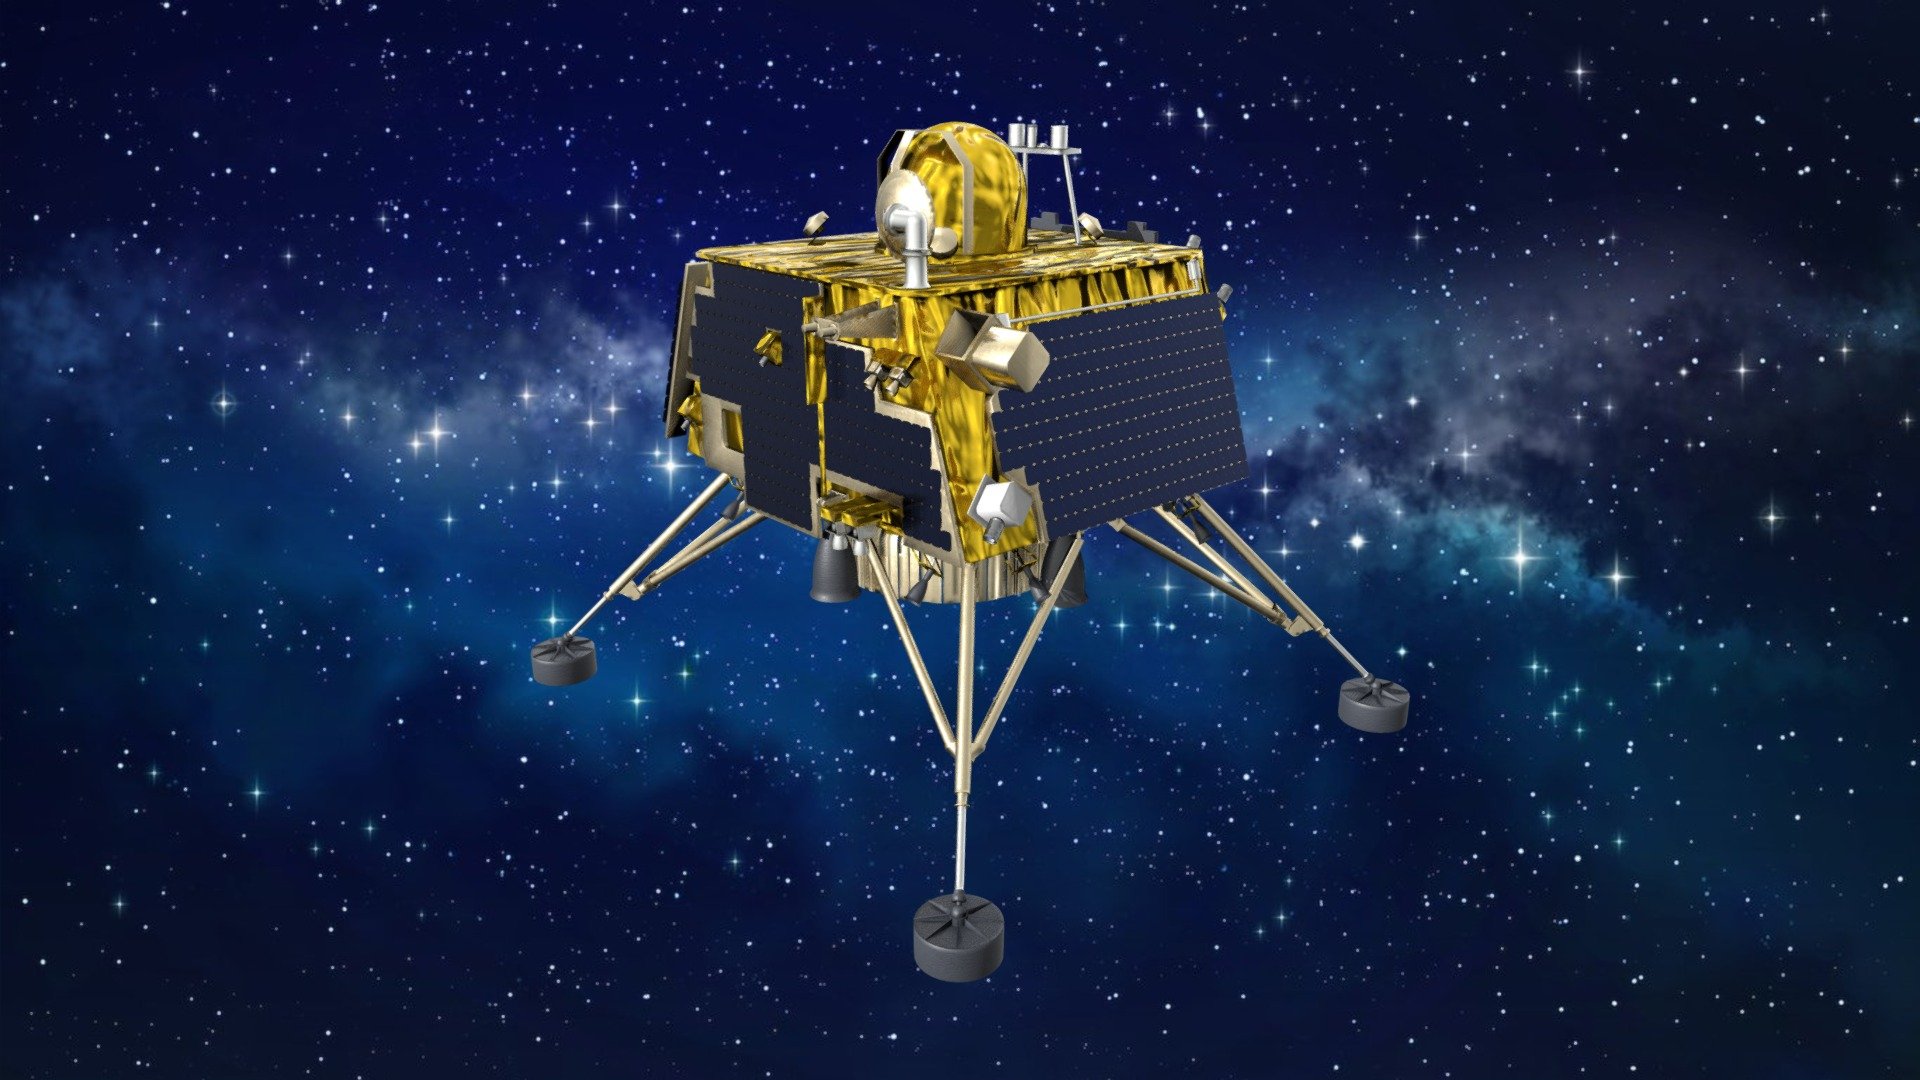 The ISRO Vikram Lander is a crucial component of India's Chandrayaan-2 mission, representing a significant advancement in lunar exploration. Named after Dr. Vikram Sarabhai, this lander plays a pivotal role in the mission's objective of landing on the Moon's south polar region.

Weighing approximately 1,471 kilograms, it is equipped with an array of scientific instruments, including a seismometer, thermal probe, and a Langmuir probe, all designed to study the lunar surface and analyze its properties. It also carries a rover called Pragyan, which is tasked with conducting on-site experiments and analysis.

The Vikram Lander's successful descent and soft landing on the lunar surface are essential to the mission's success, as it will pave the way for further scientific exploration of the Moon's uncharted territories. ISRO's Vikram Lander represents India's dedication to lunar exploration and scientific discovery, marking a significant milestone in the country's space endeavors 3d model